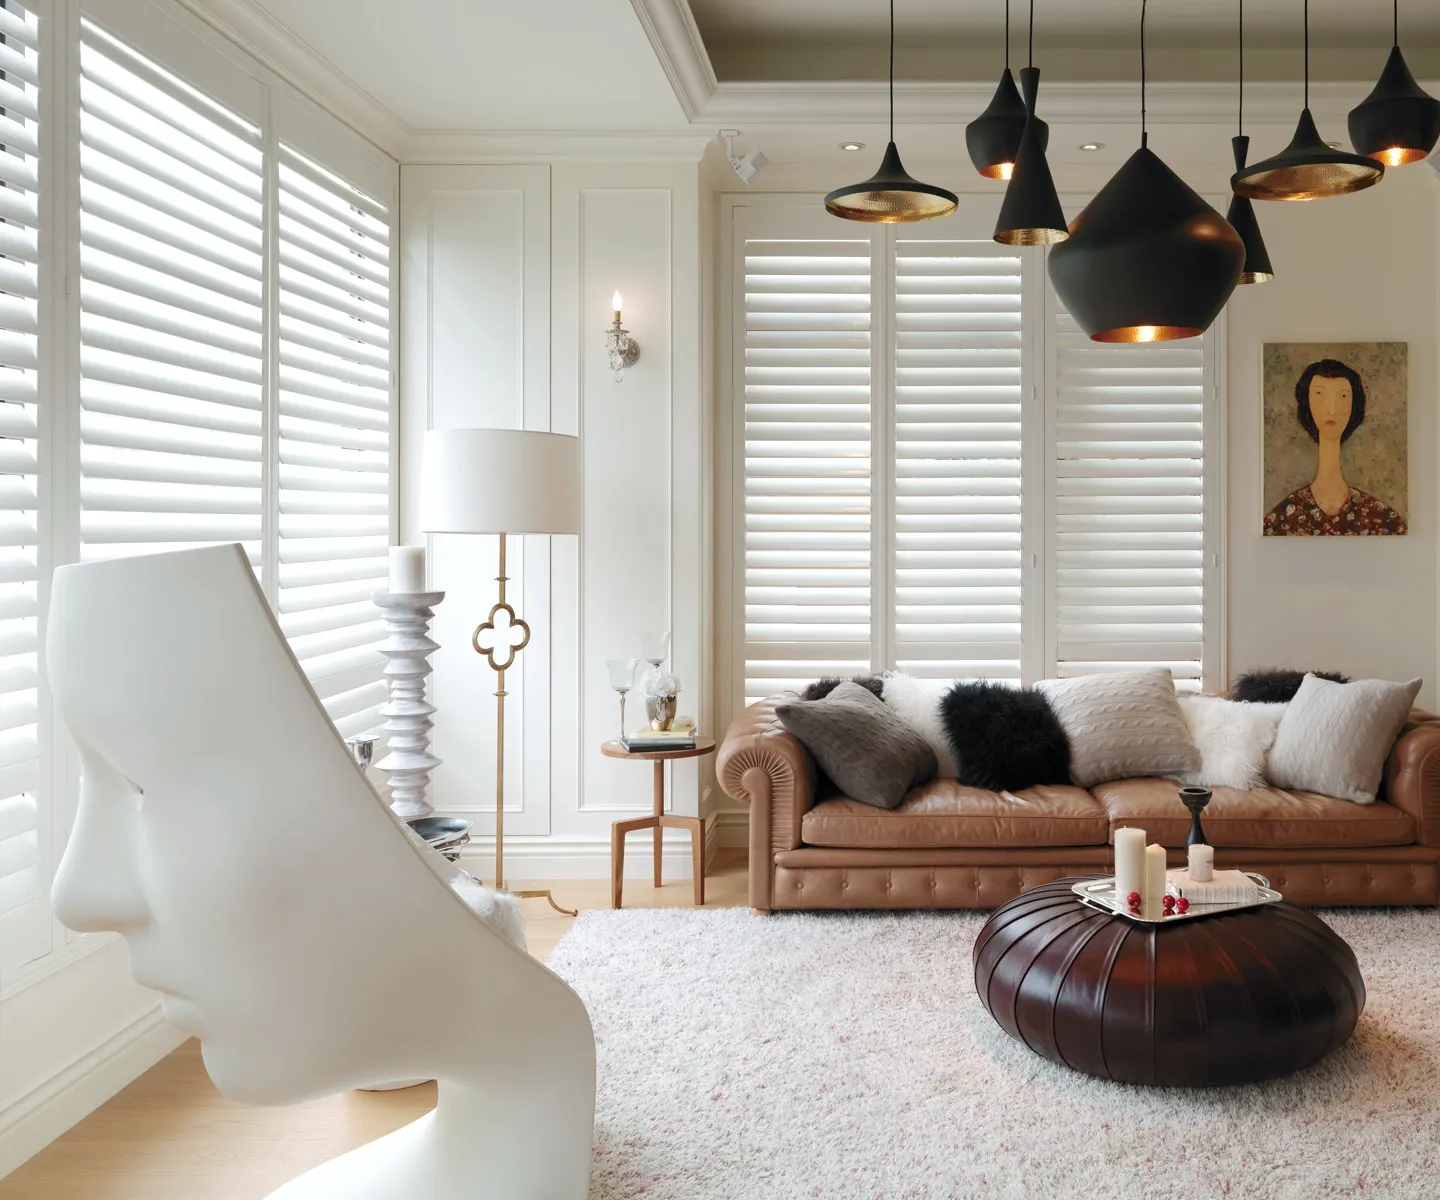 Artsy living area with hanging lights and clean, plantation shutters in Fairfax, Va